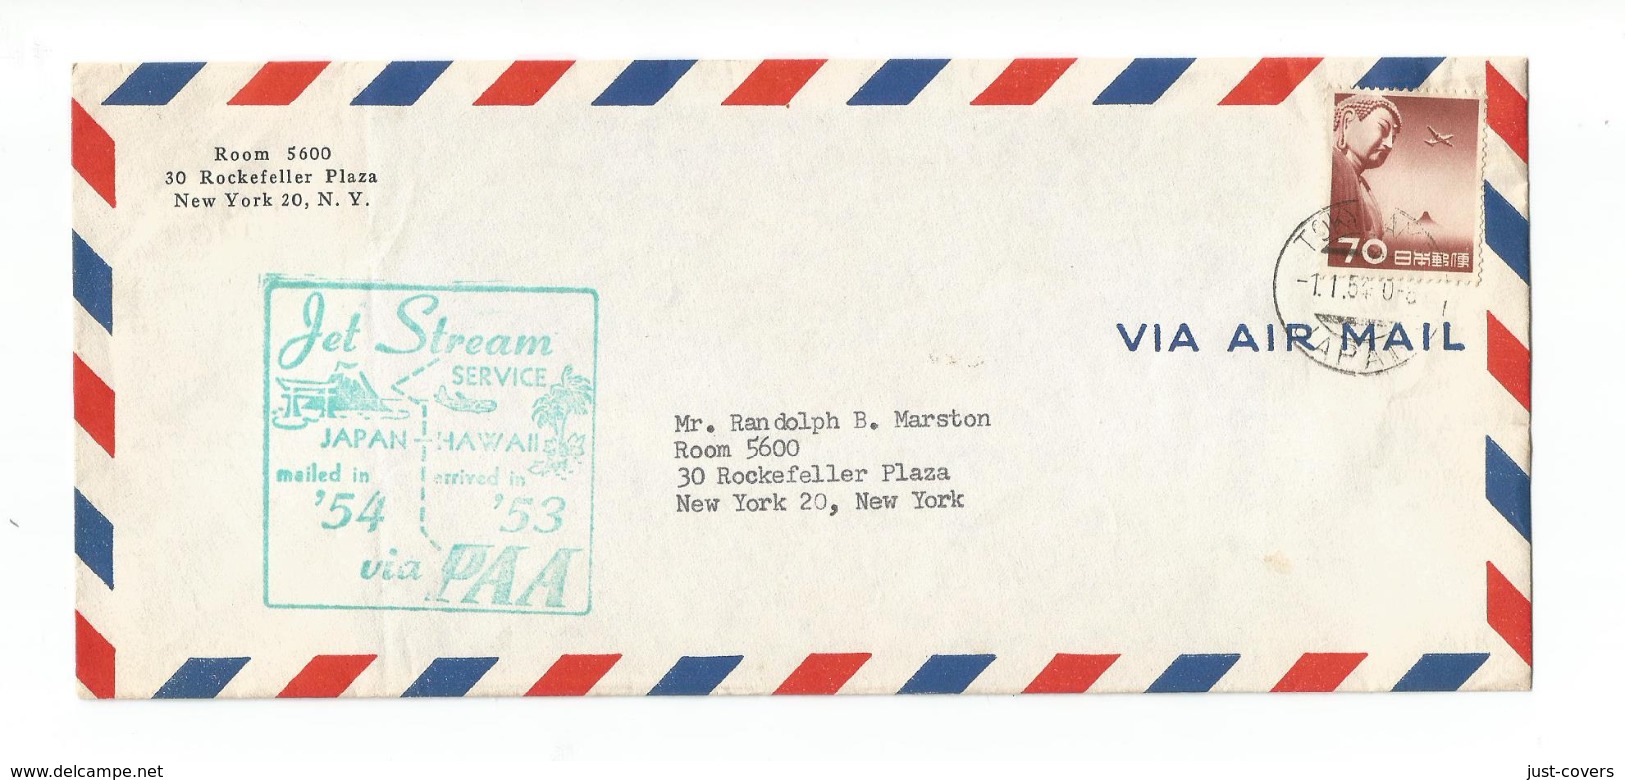 Japan: Jet Stream Service. Mailed In 1954 Arrived In Hawaii 1953. See Cover For Details. Contents Included - Airmail